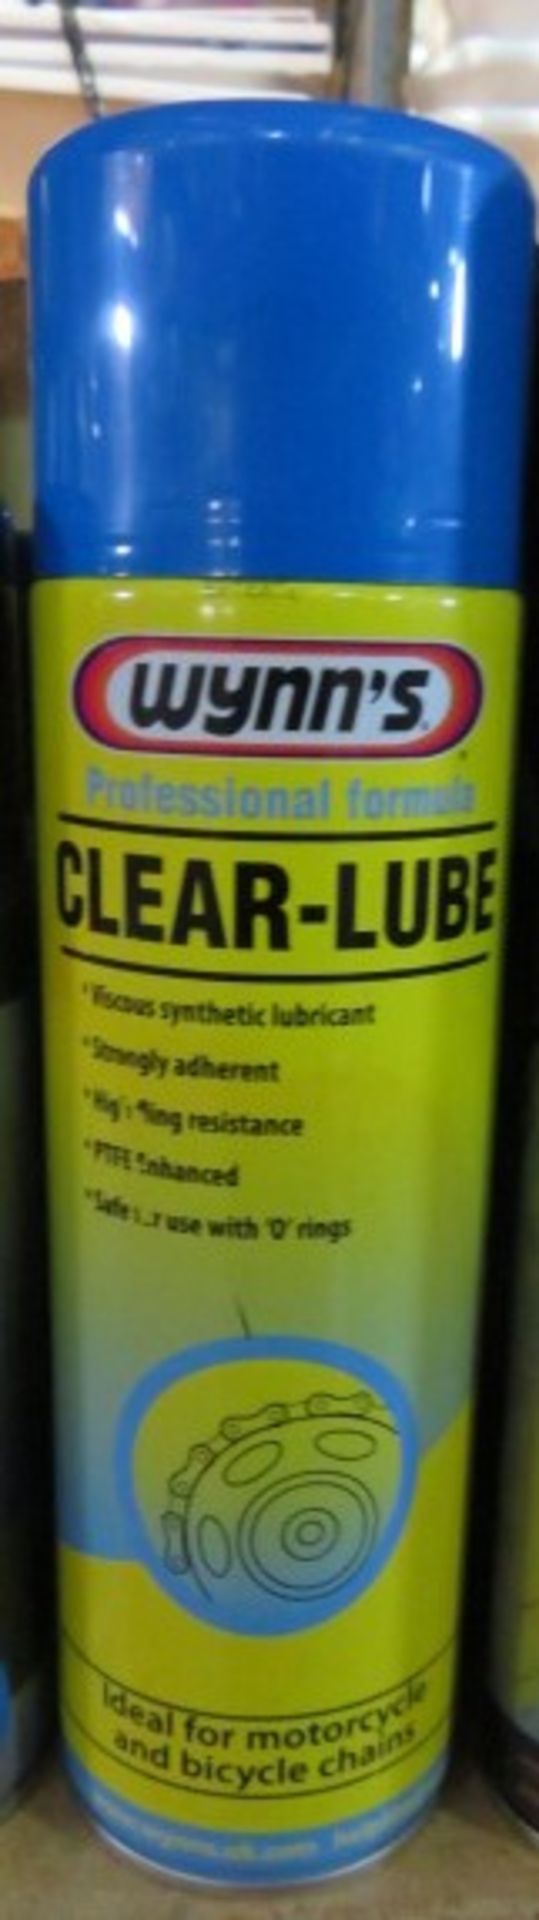 7x Wynns Professional Formula Clear-Lube. 500ml. Ideal for motorcylce and bike chains. UK DELIV...